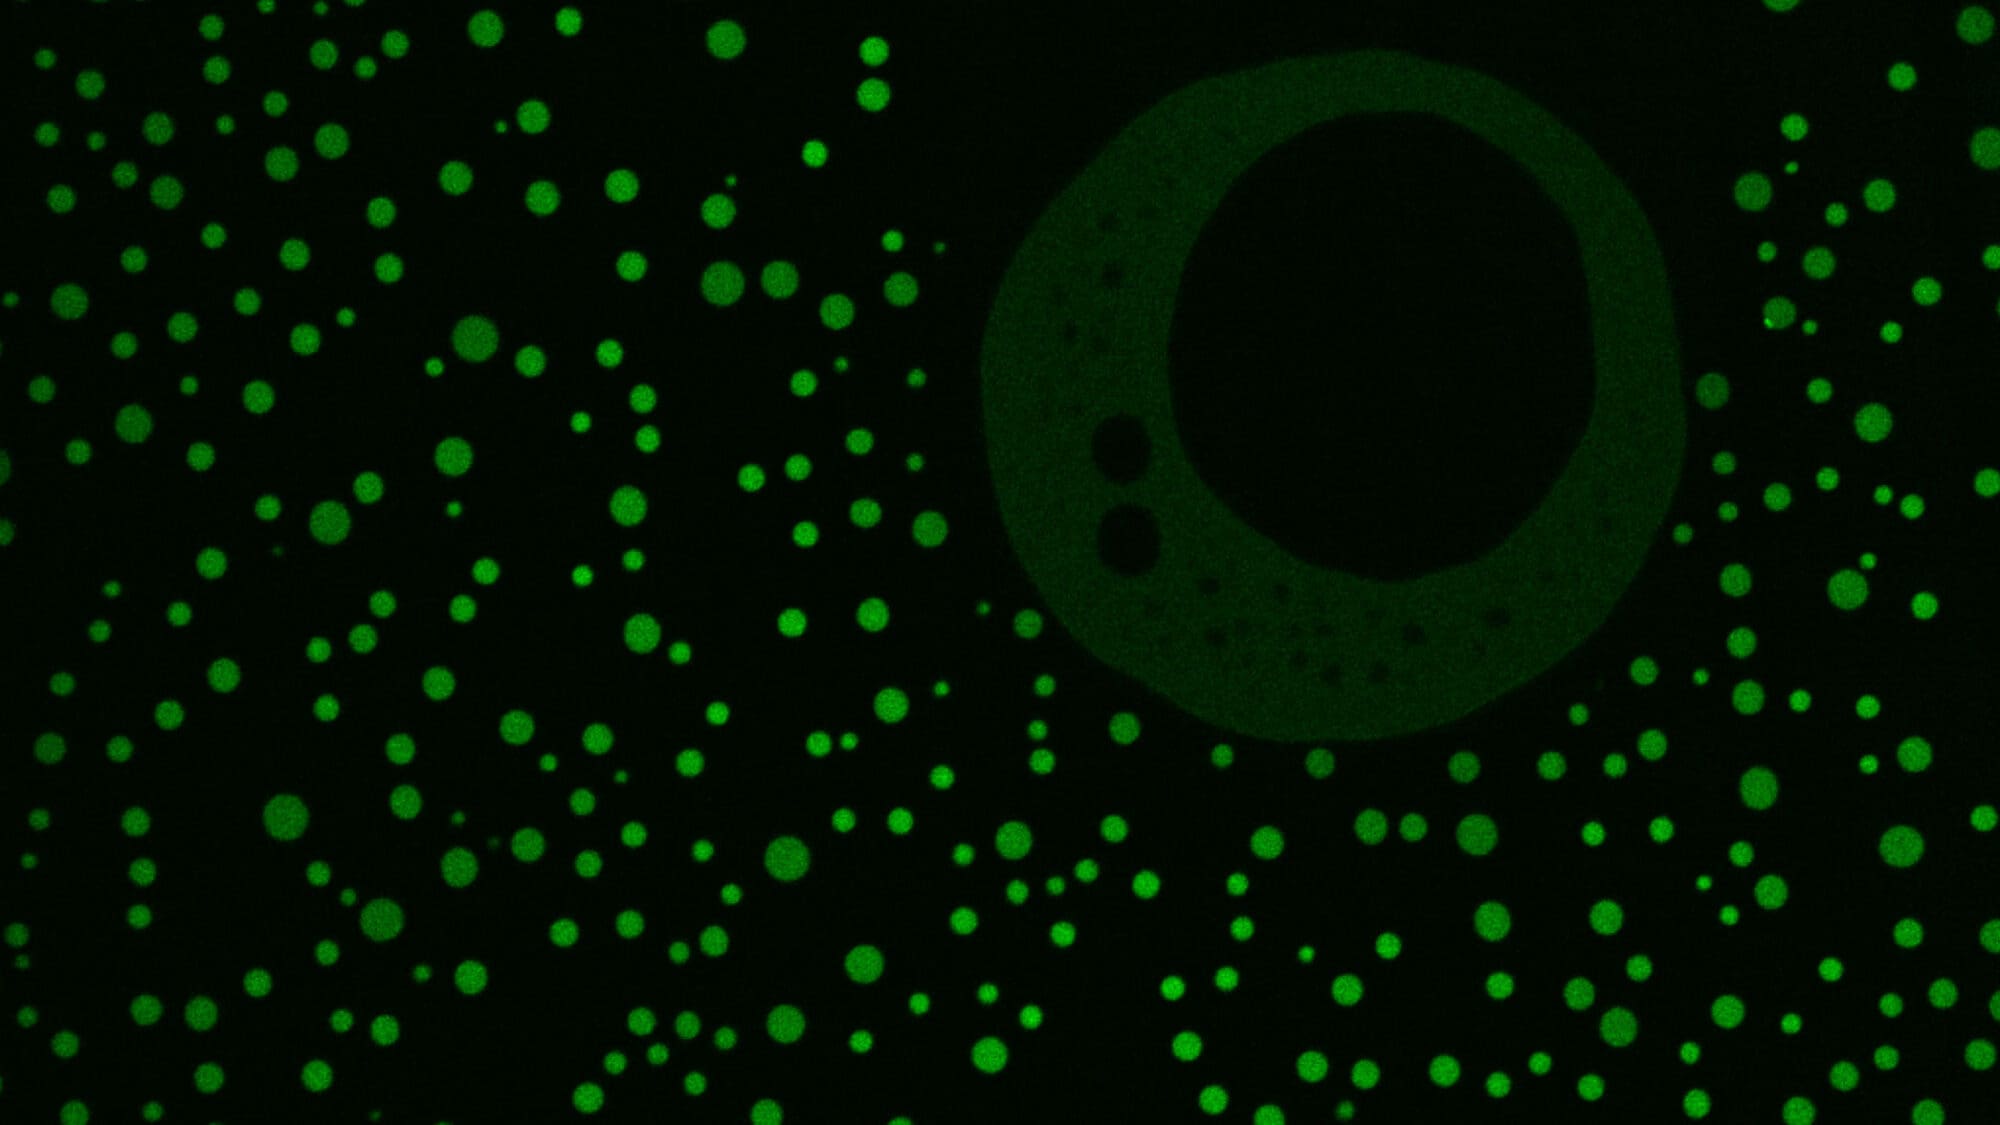 Microscope image showing dozens of green fluorescent droplets of varying sizes on a black background.